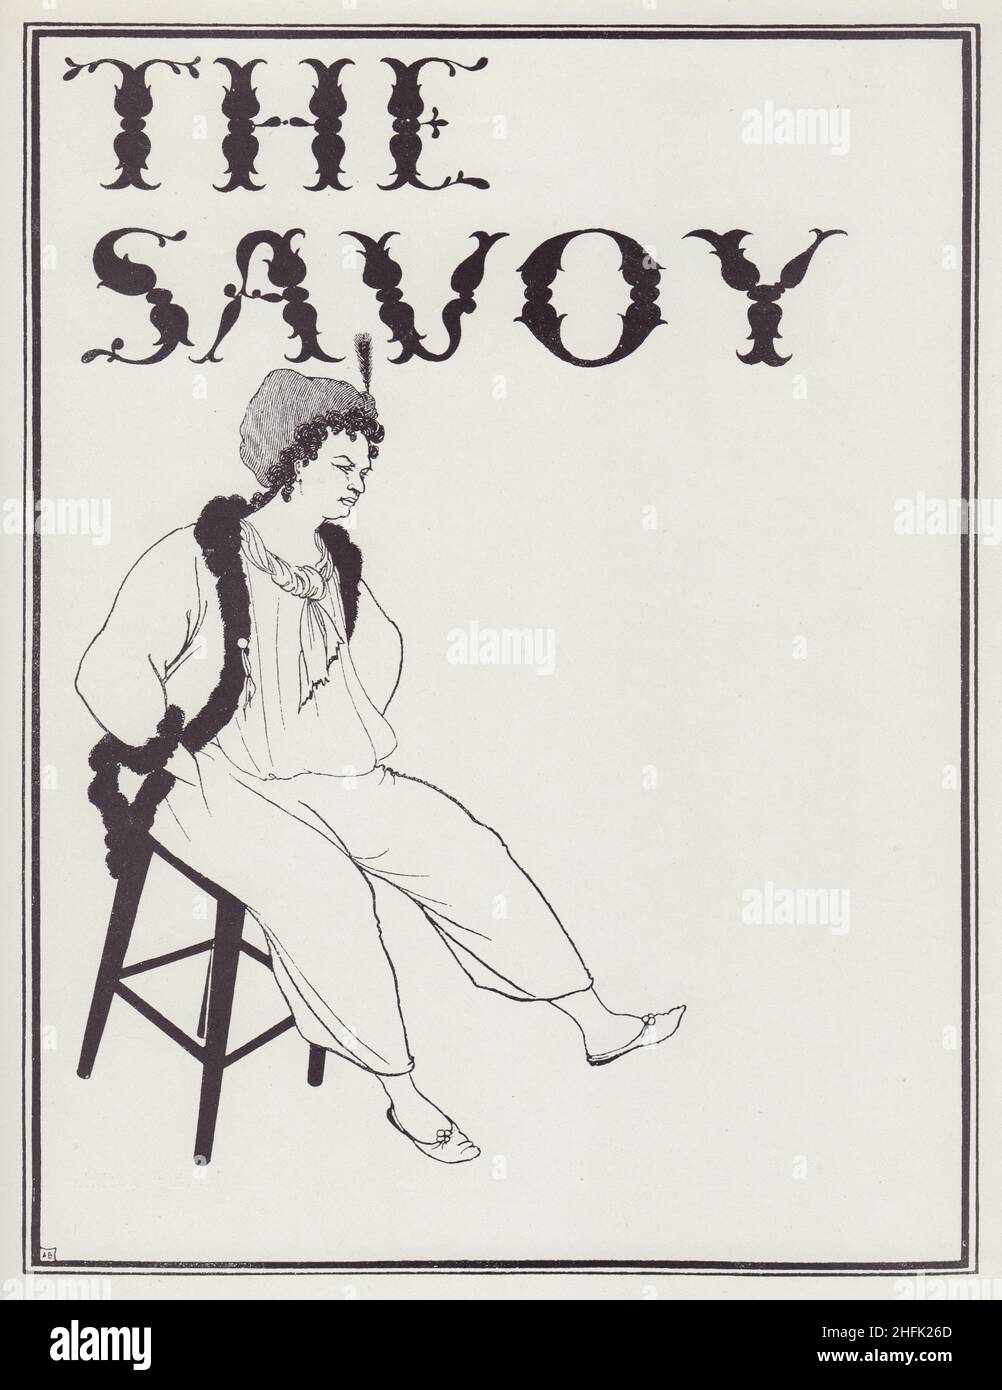 Cover Design for The Savoy No. 8, 1896. An androgynous figure in a turban tilts forward on a stool. Published in &quot;The Best of Beardsley&quot; edited by R. A. Walker, [The Bodley Head, London, 1948] Stock Photo